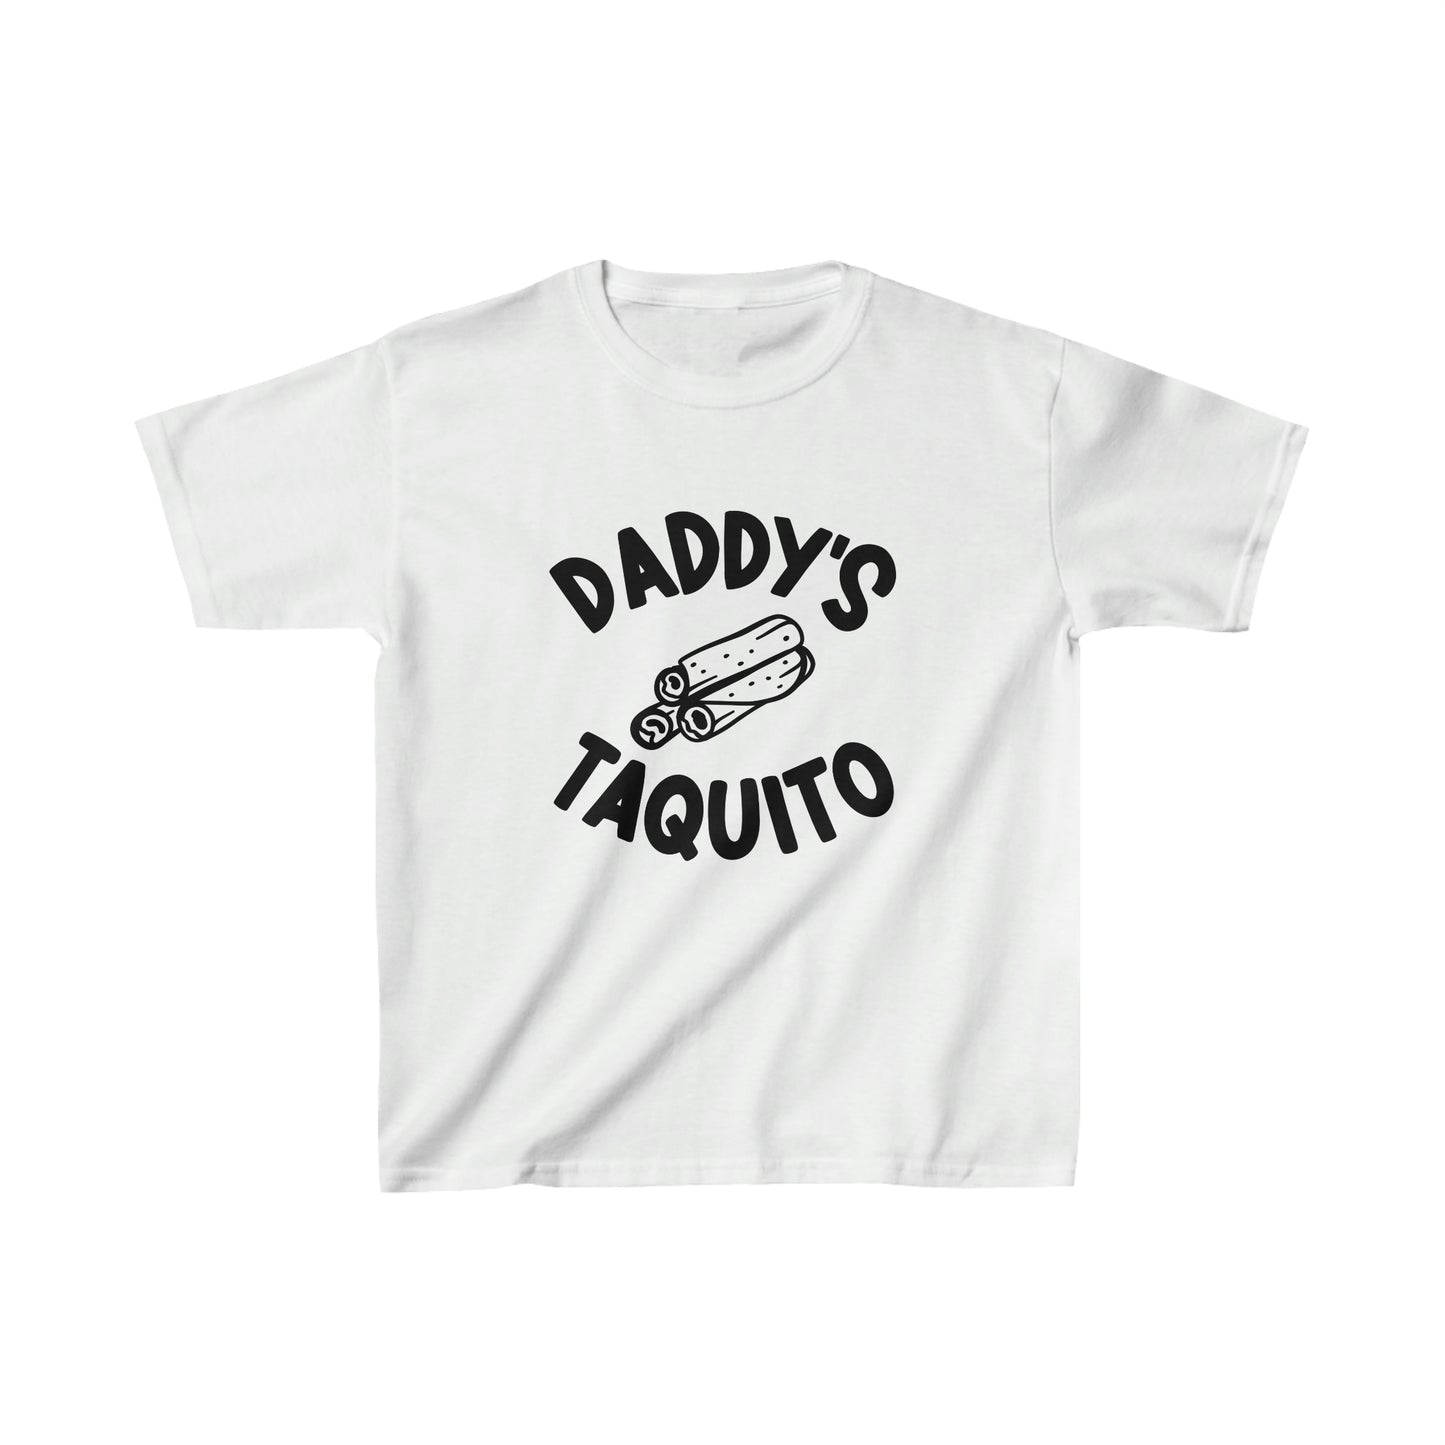 DADDY'S TAQUITO KID'S T-SHIRT